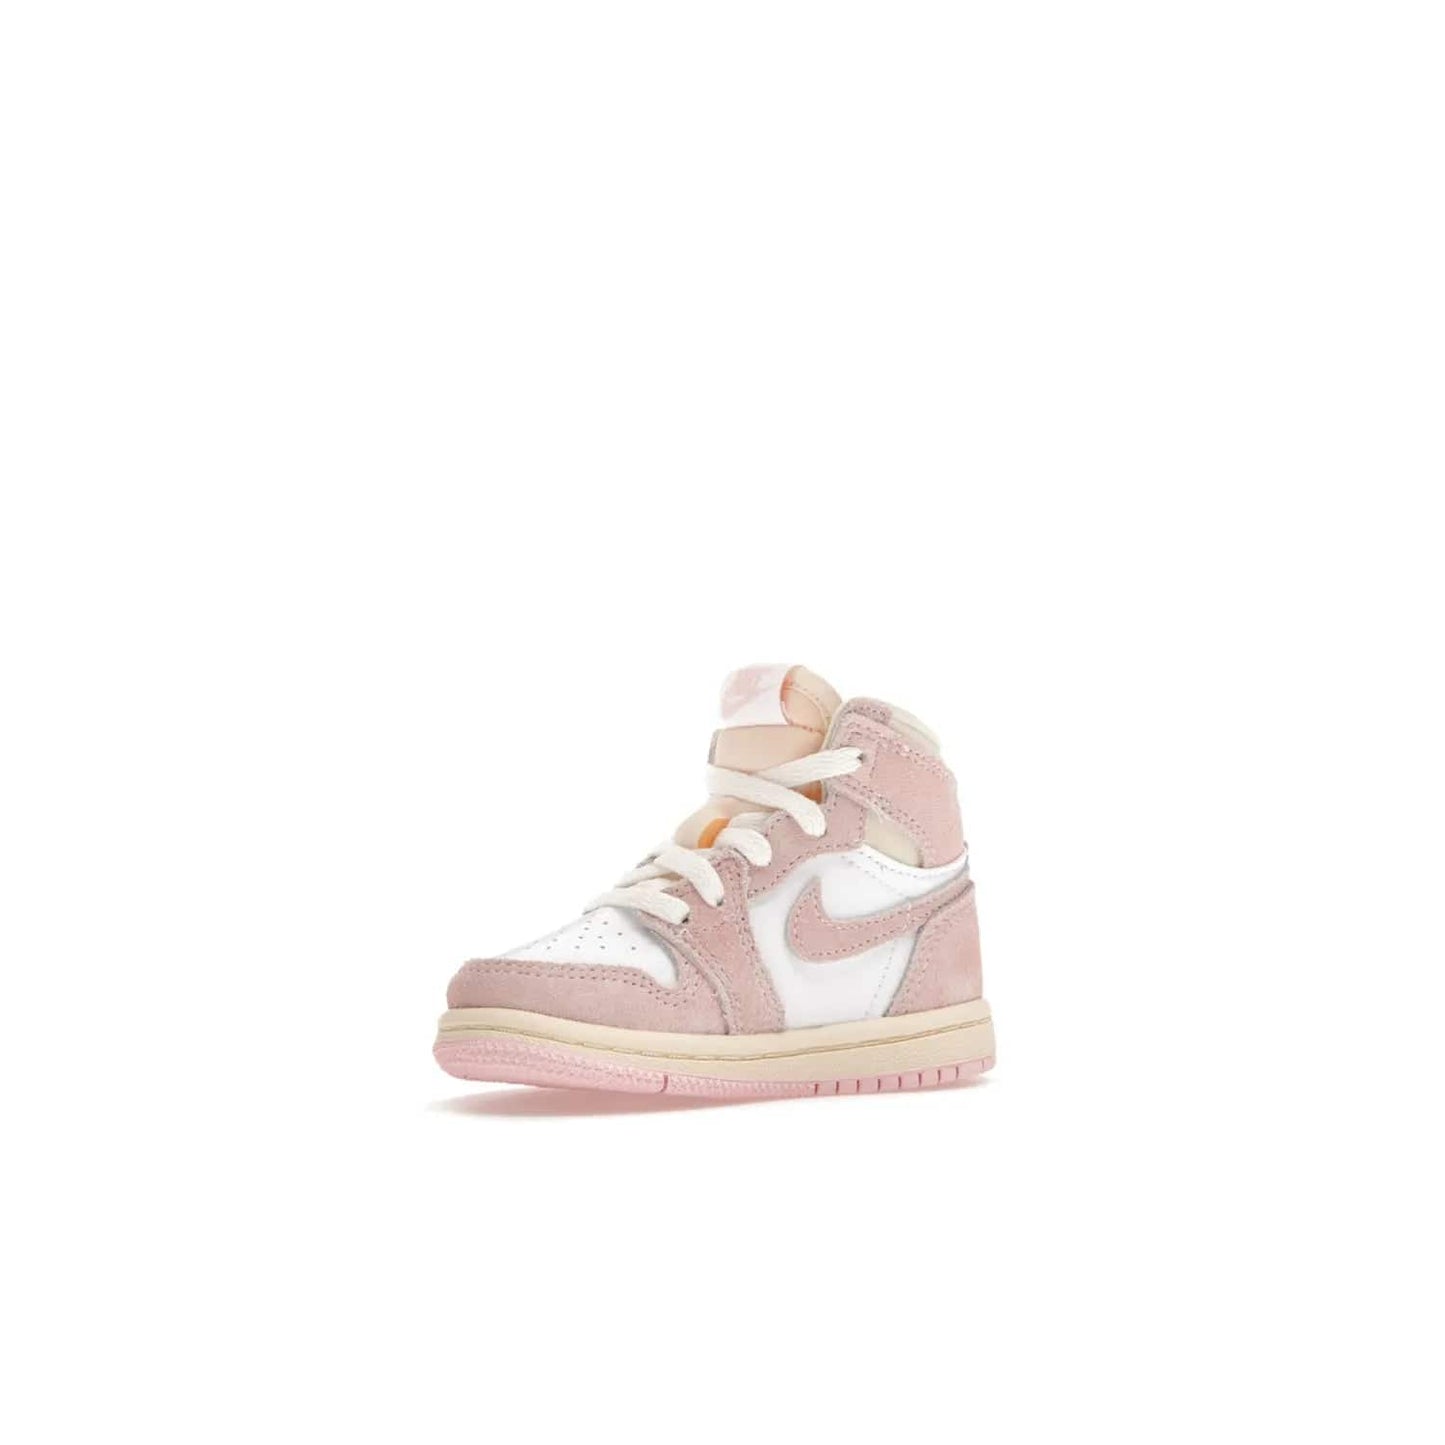 Jordan 1 Retro High OG Washed Pink (TD) - Image 16 - Only at www.BallersClubKickz.com - Retro style meets modern comfort: Introducing the Jordan 1 High OG Washed Pink (TD). Combining Atmosphere/White/Muslin/Sail colors with a high-rise silhouette, these shoes will be an instant classic when they release April 22, 2023.